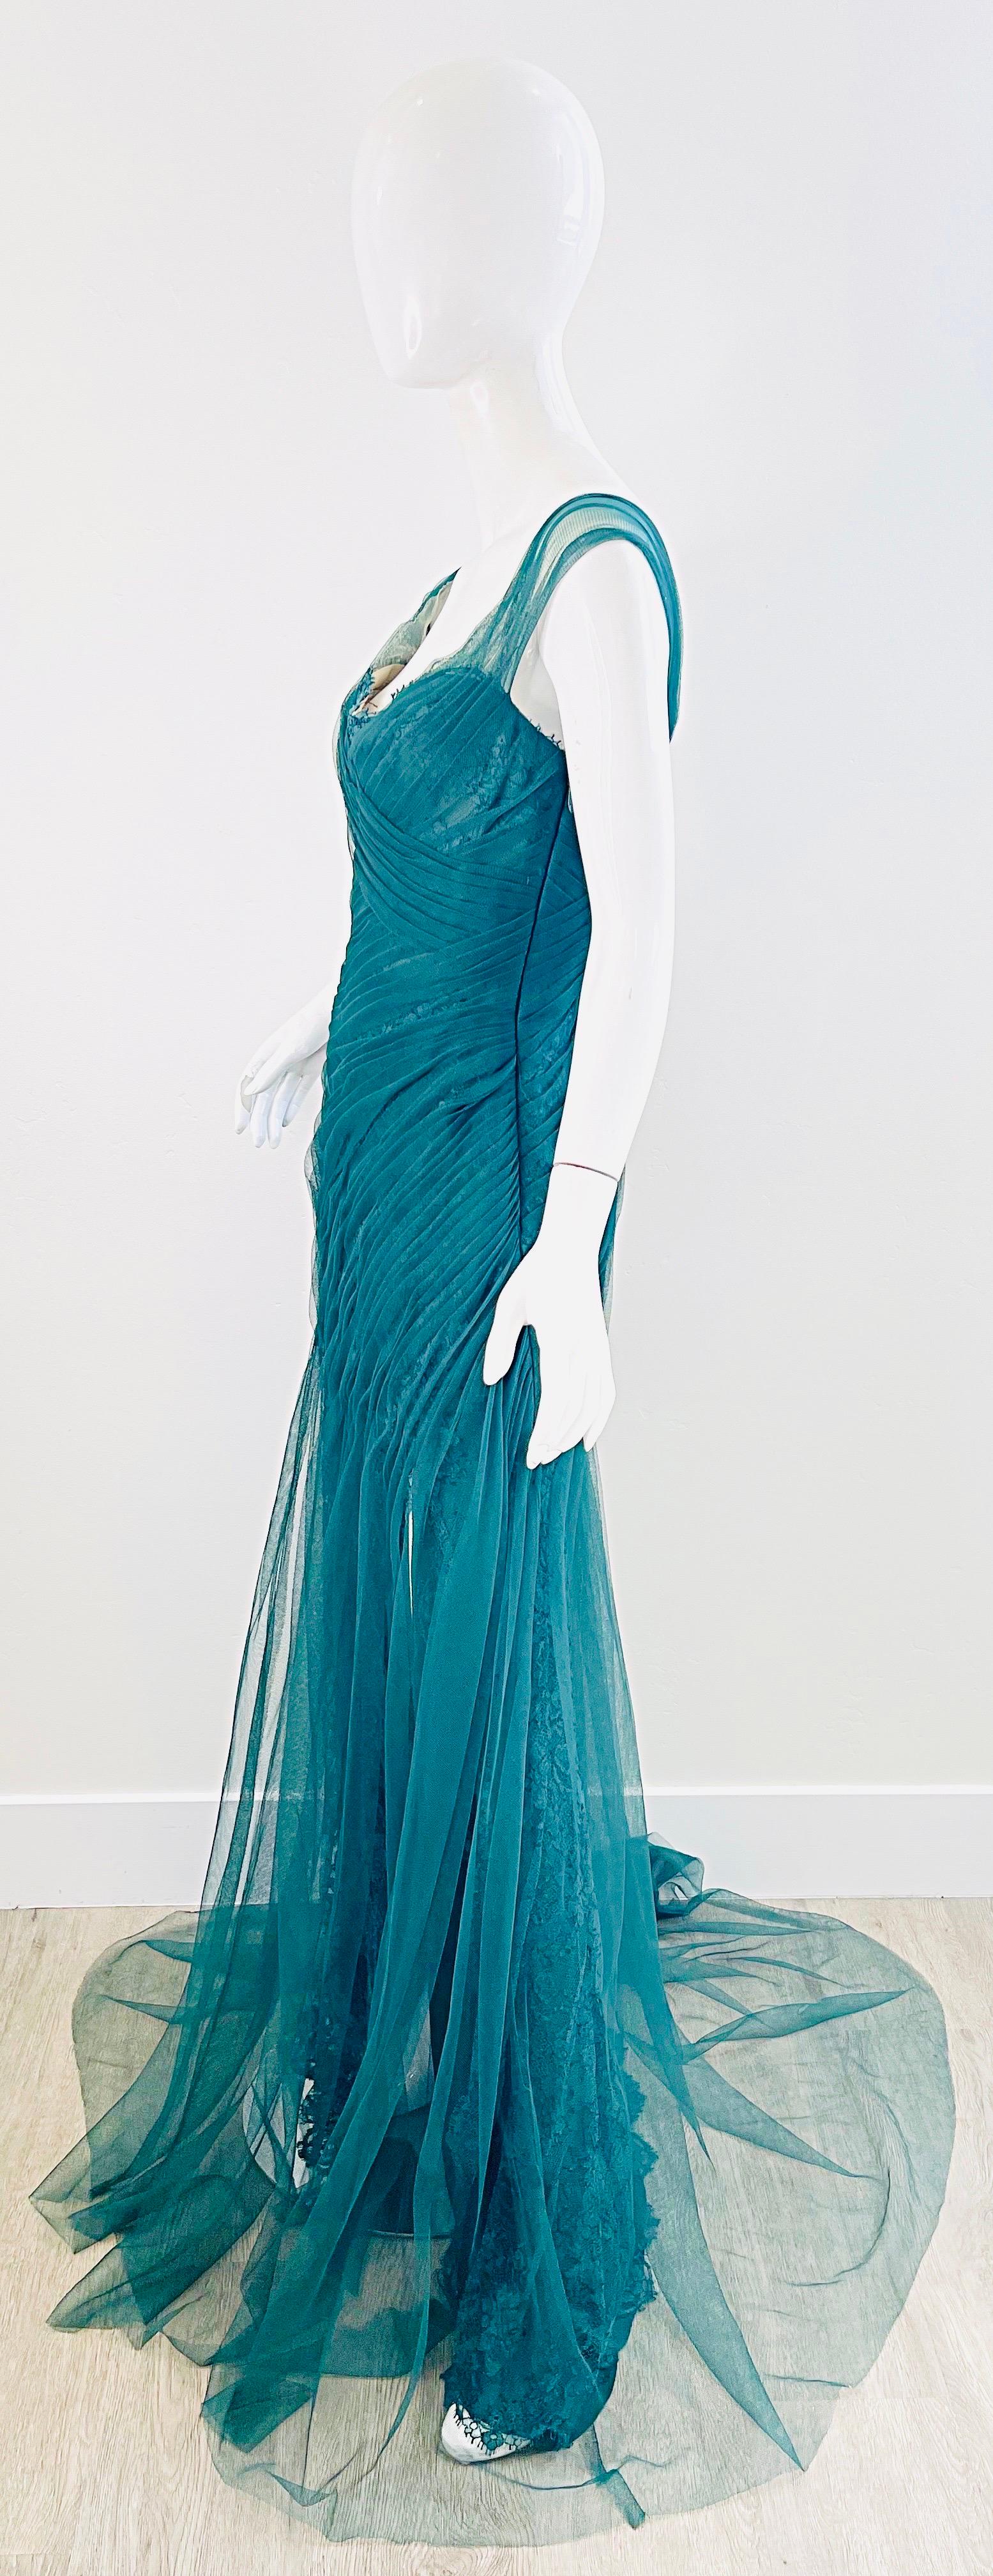 NWT Monique Lhuillier Runway Spring 2013 Size 4 Emerald Green Lace Gown Dress For Sale 3